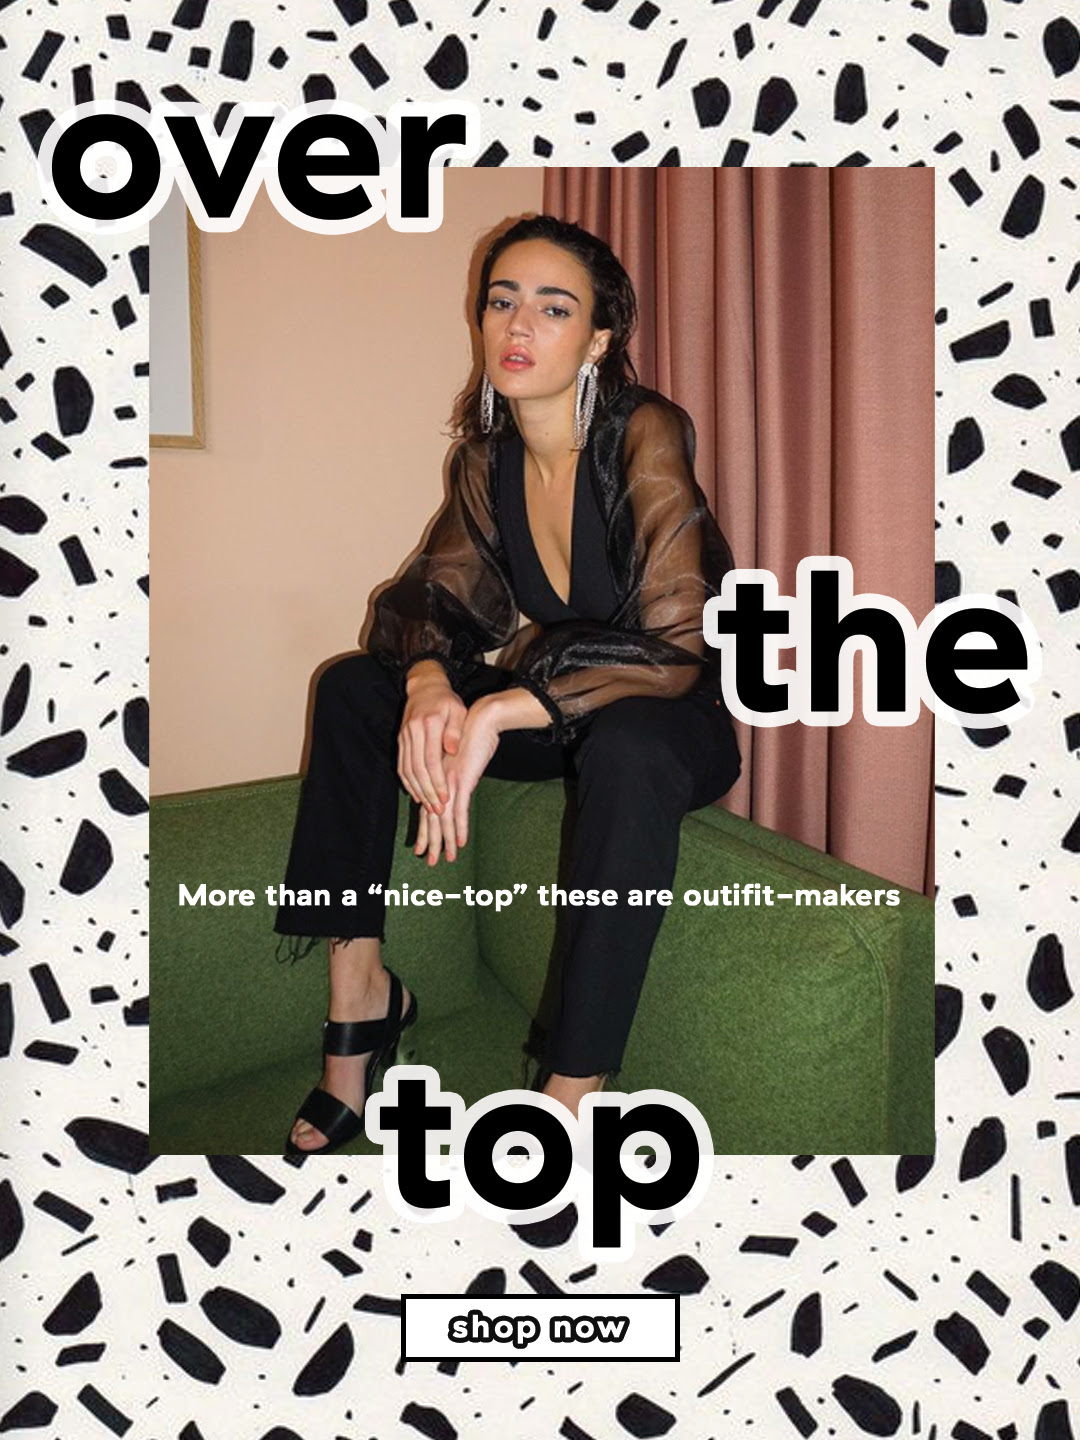 Dresses.ie - Over the TOP